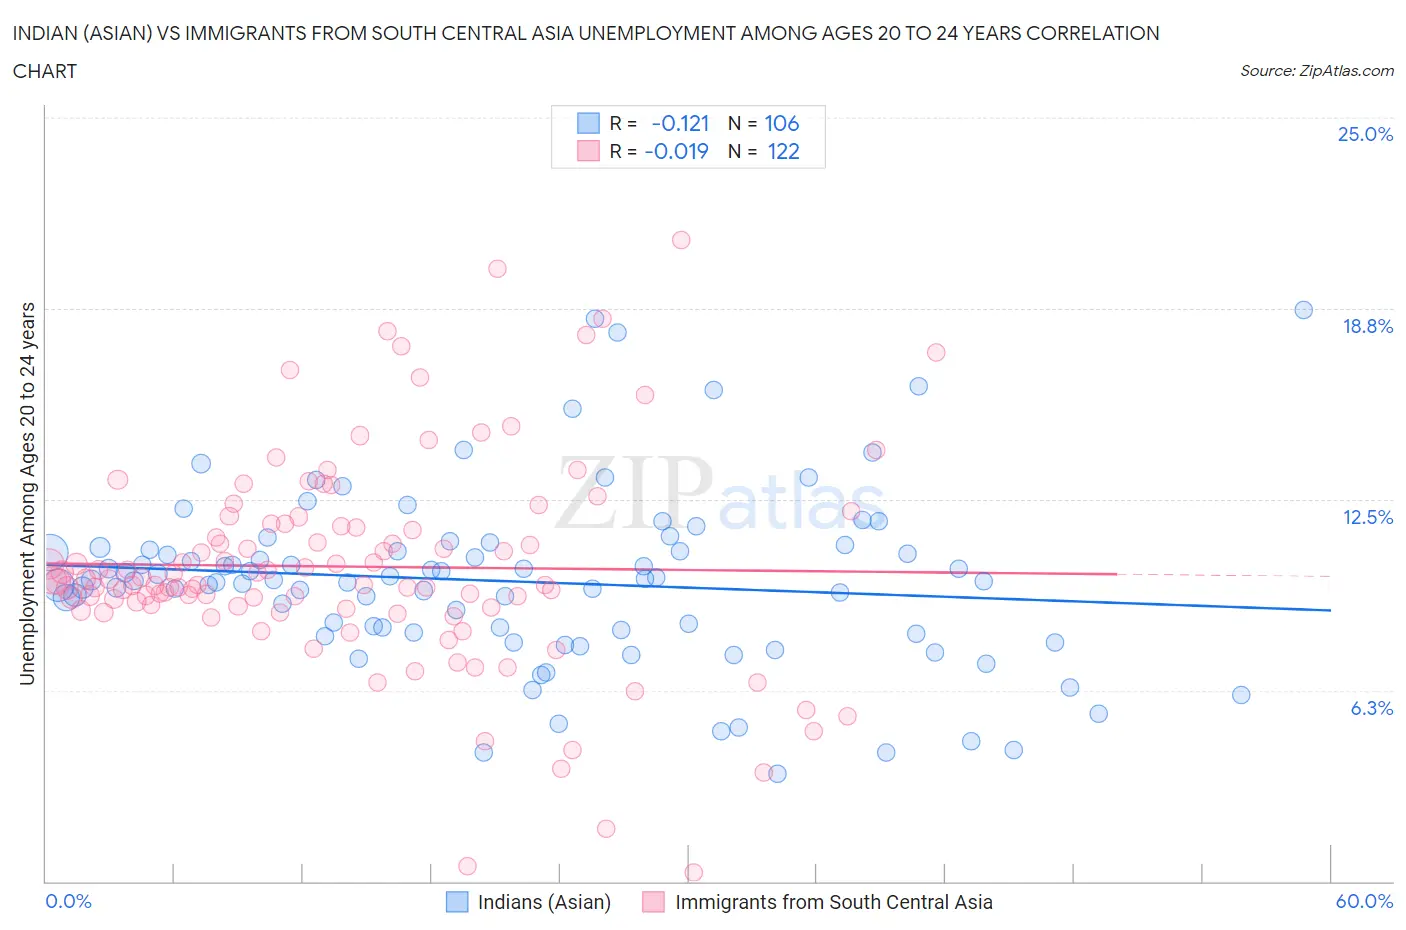 Indian (Asian) vs Immigrants from South Central Asia Unemployment Among Ages 20 to 24 years